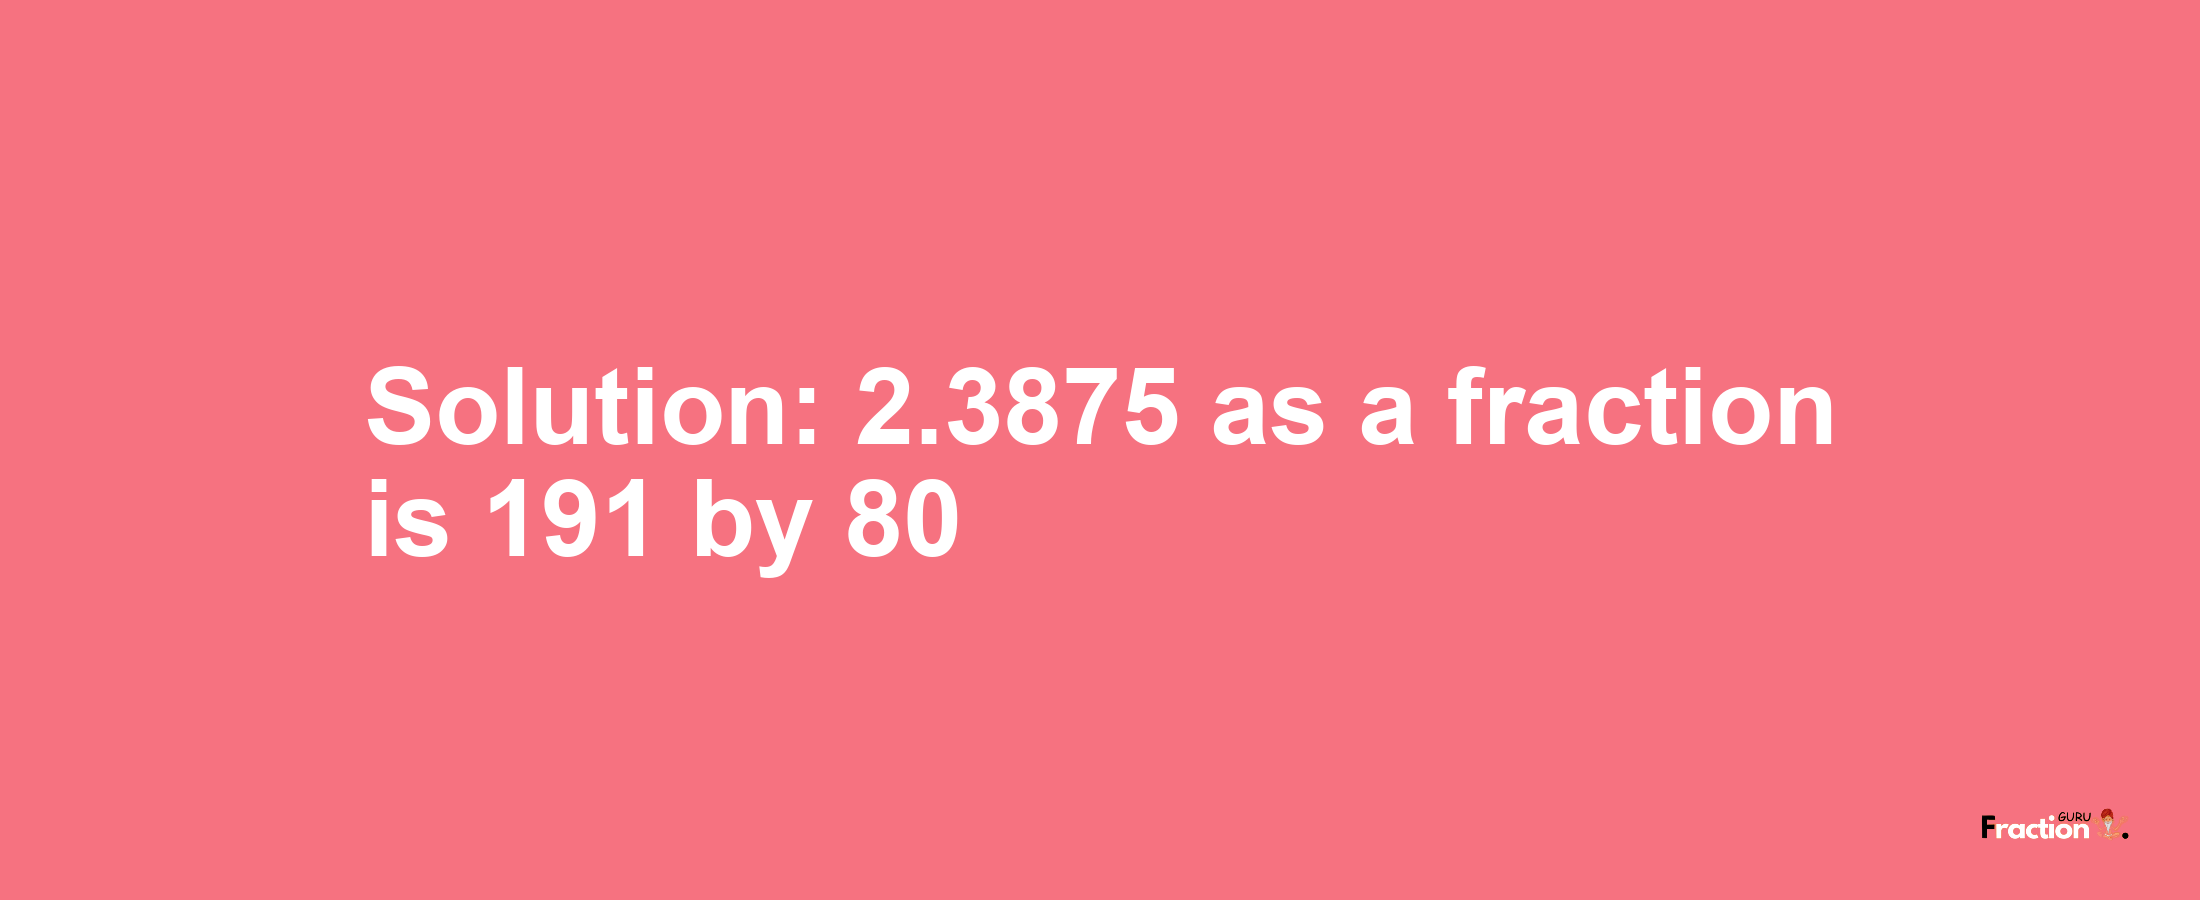 Solution:2.3875 as a fraction is 191/80